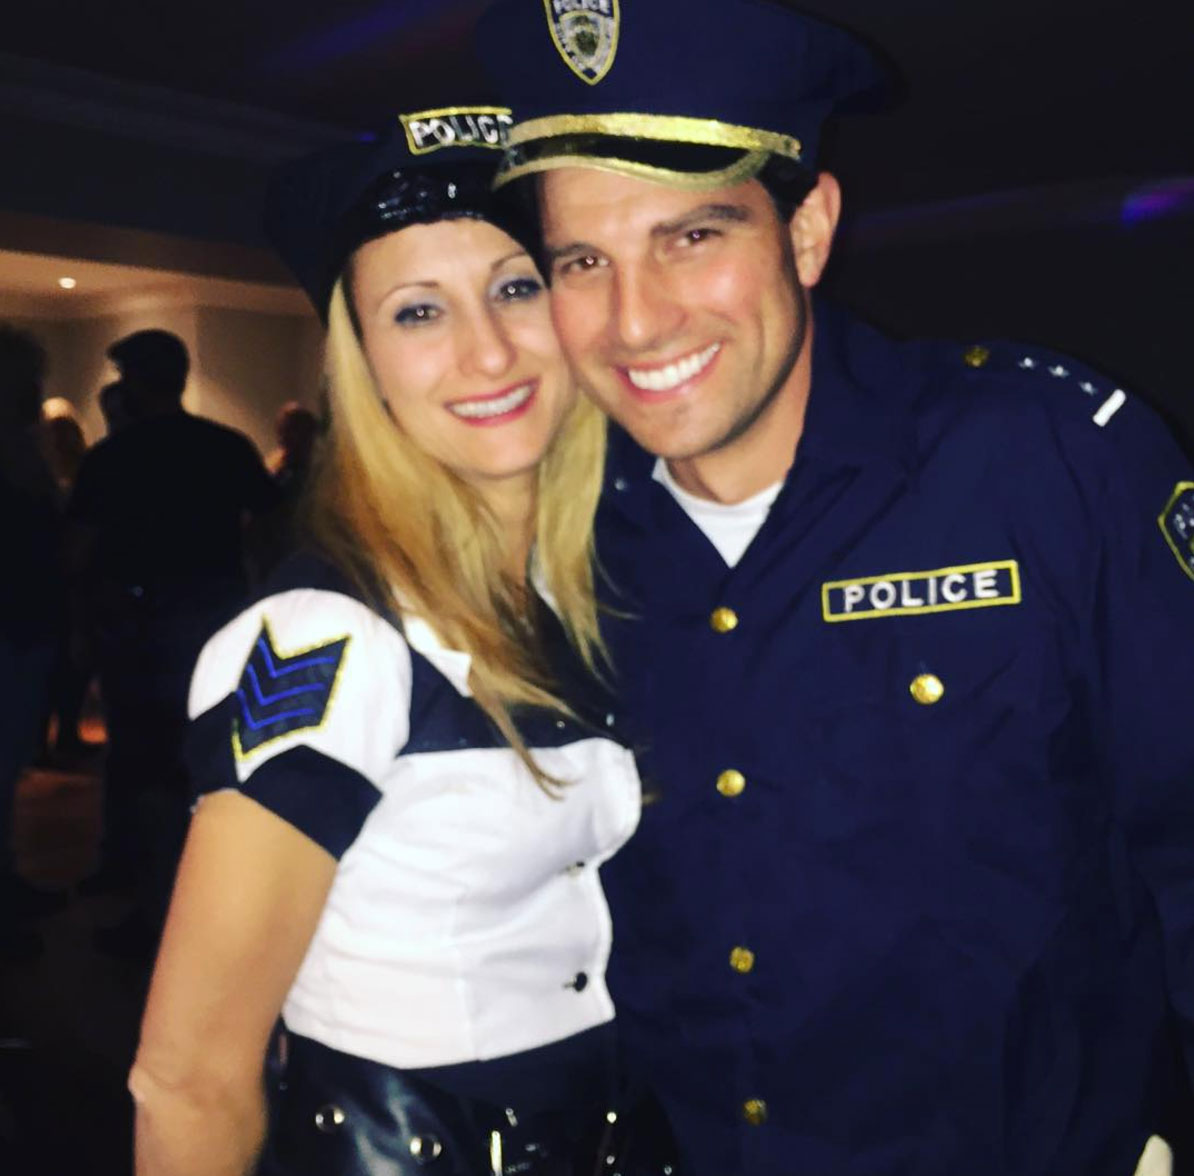 Sabrina and Scott McGillivray dressed up as police officers